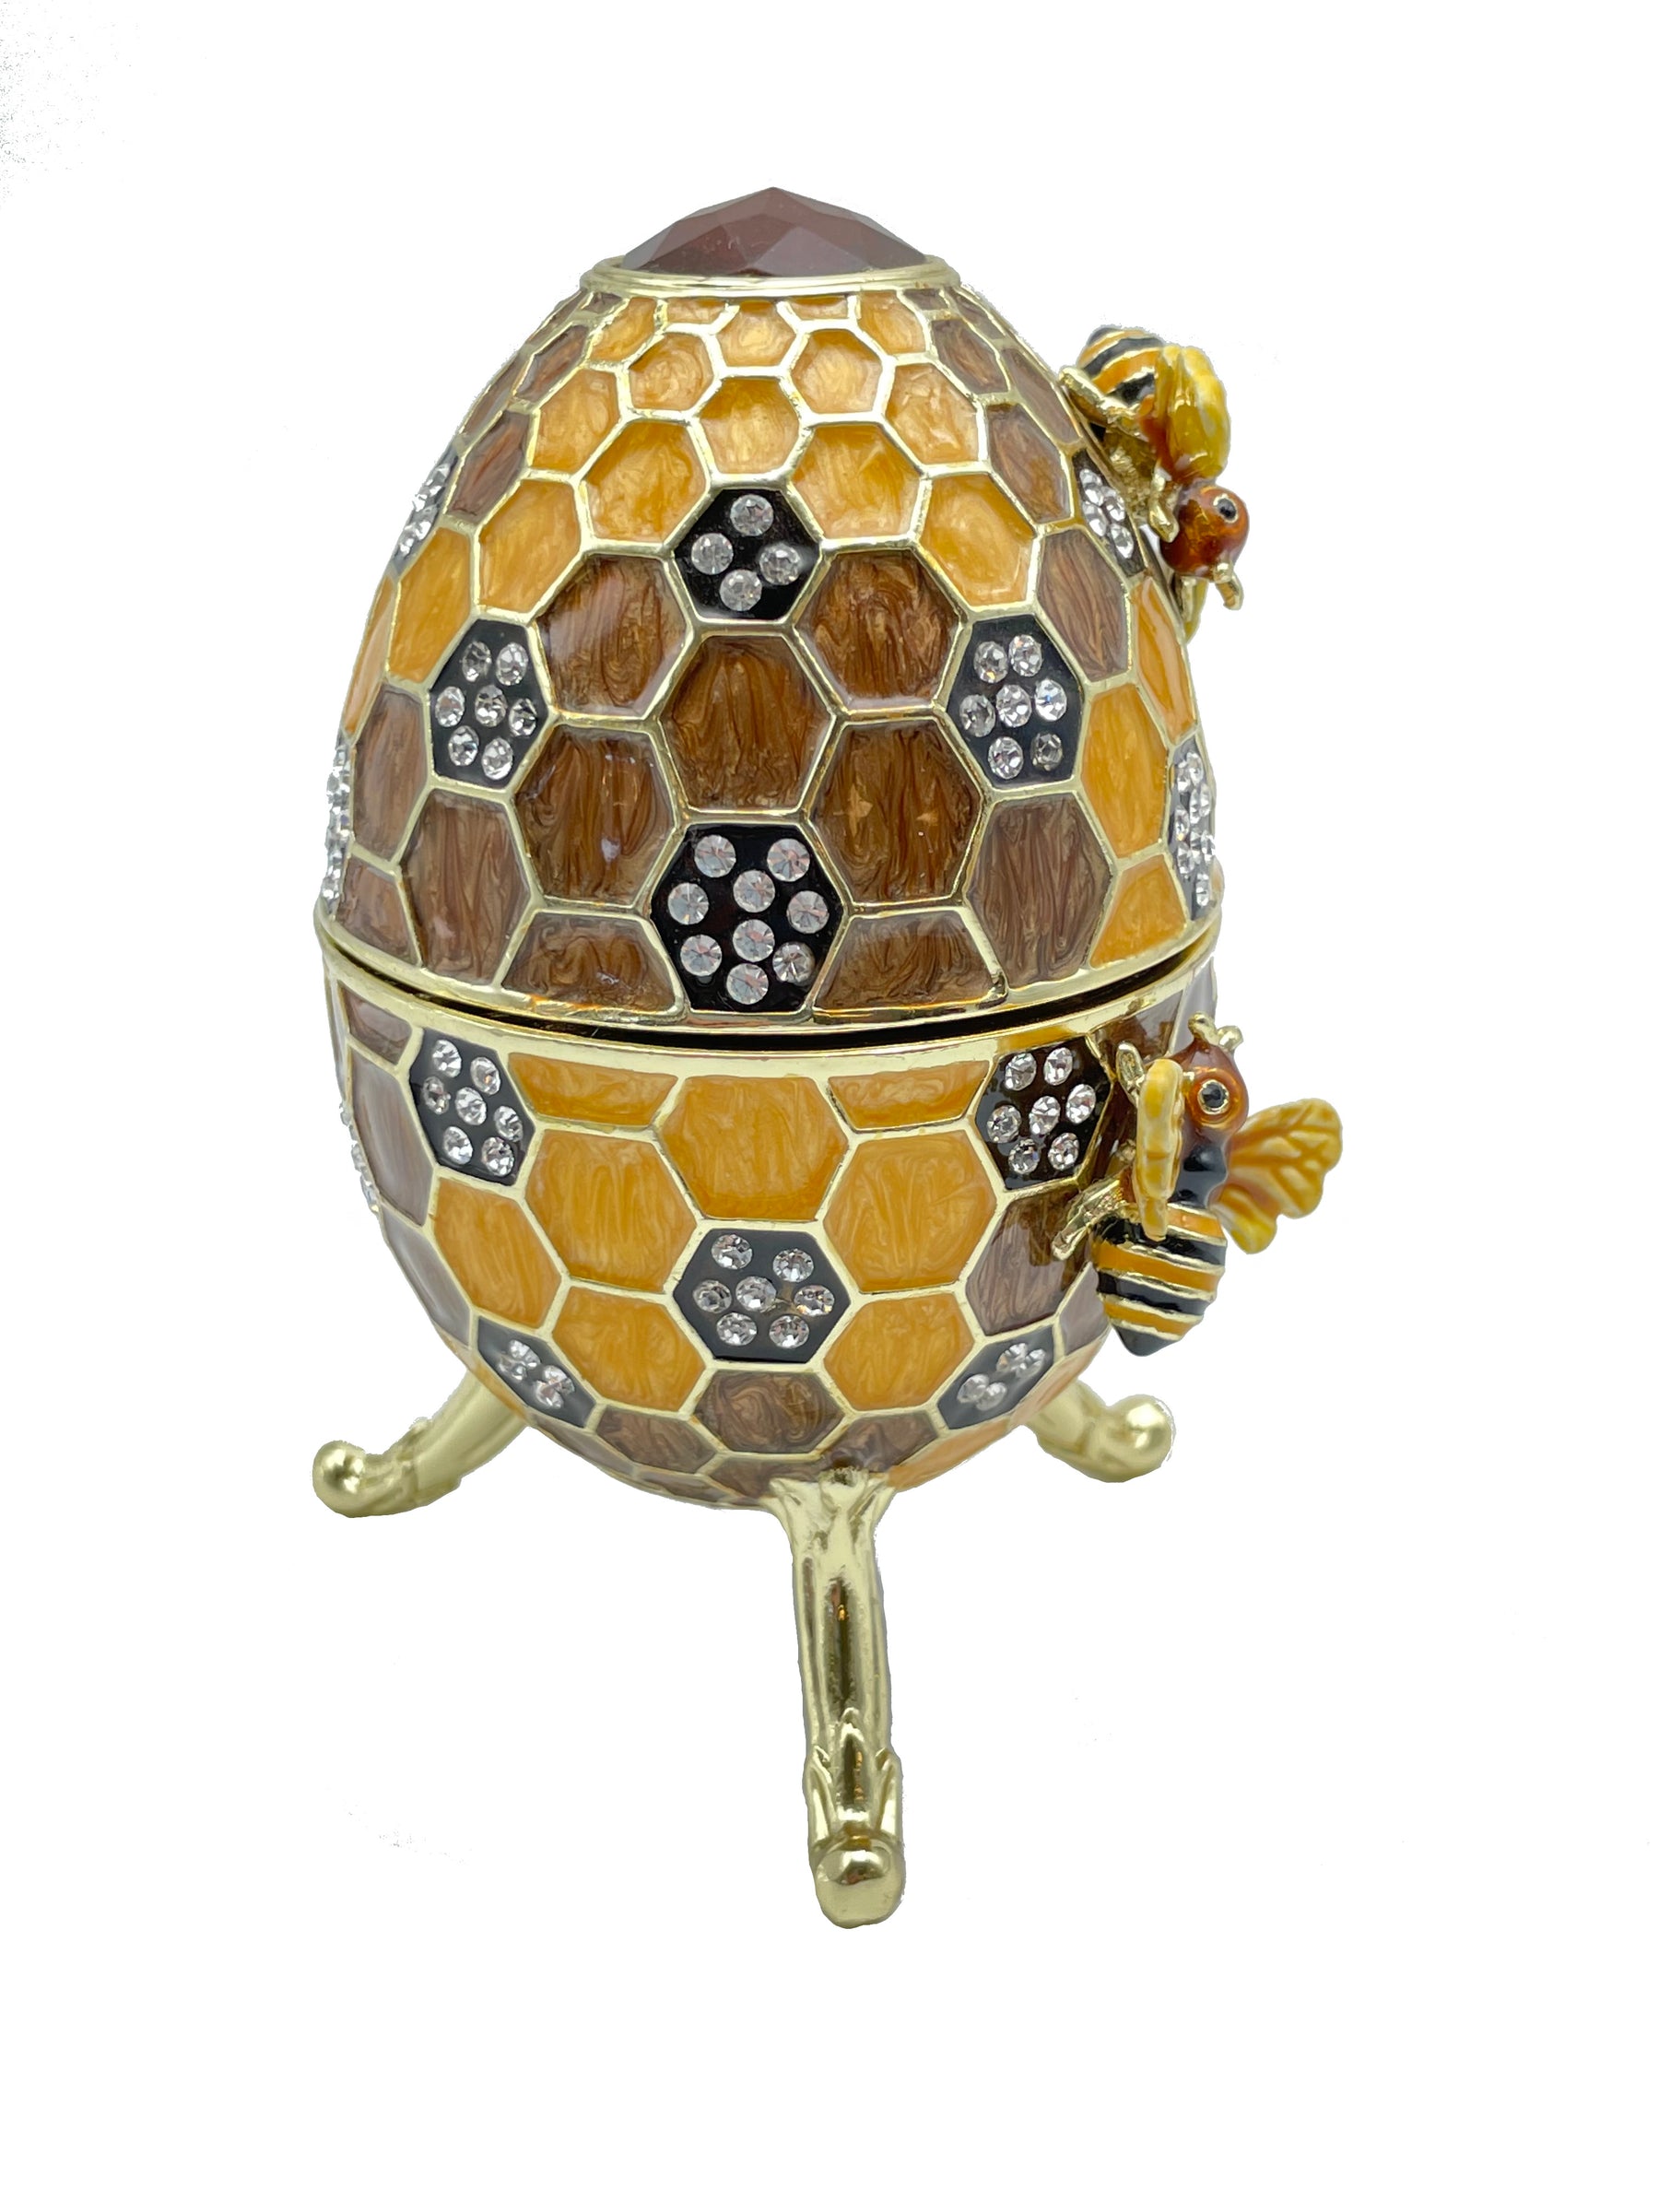 Beehive Egg with Bees